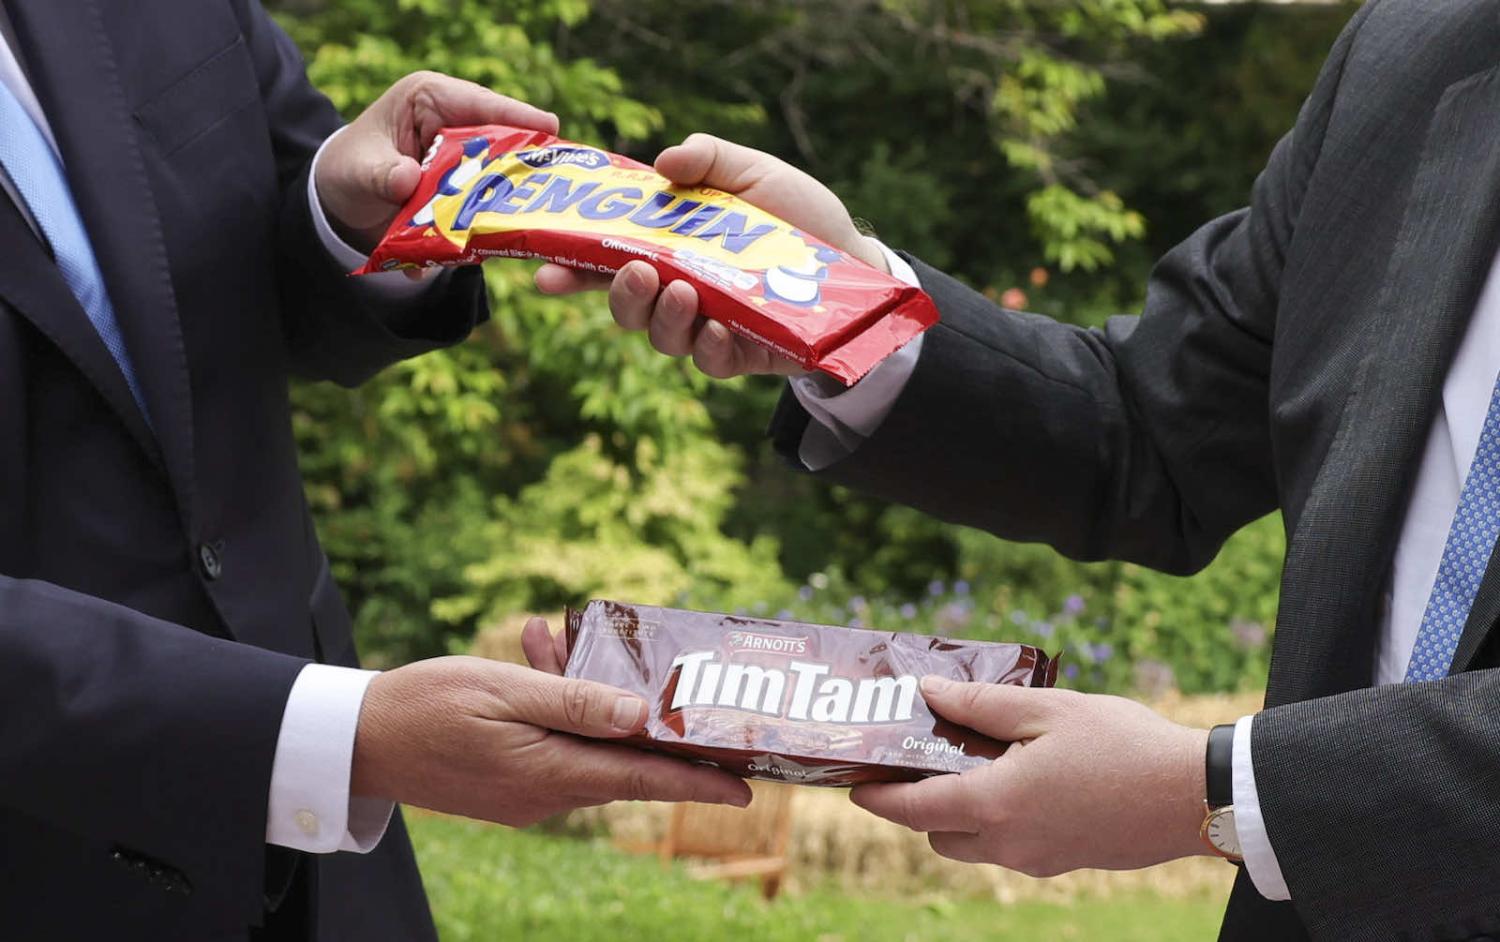 Scott Morrison and Boris Johnson exchange Penguin and Timtam biscuits after talks in London this week (Andrew Parsons/No 10 Downing Street/Flickr)